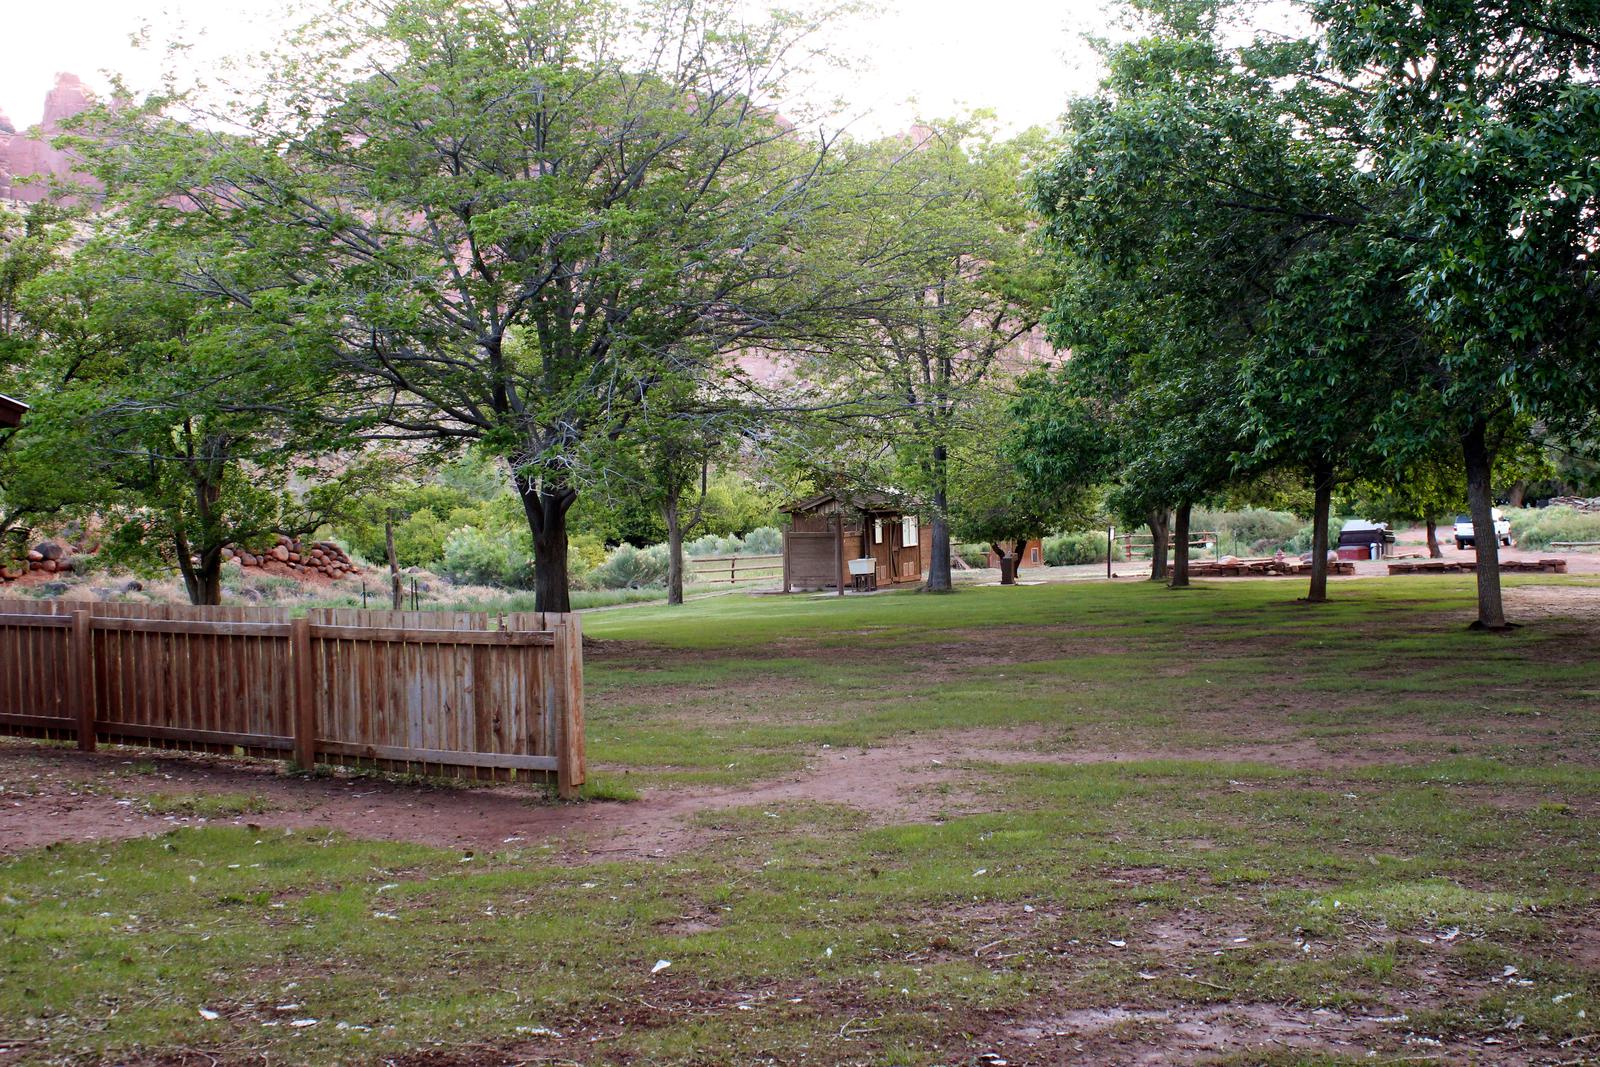 A grassy field. A fence is in the front of image, across half of the image. There are a few trees in the area. A small building is in the background.View from the South Corner of Group Site